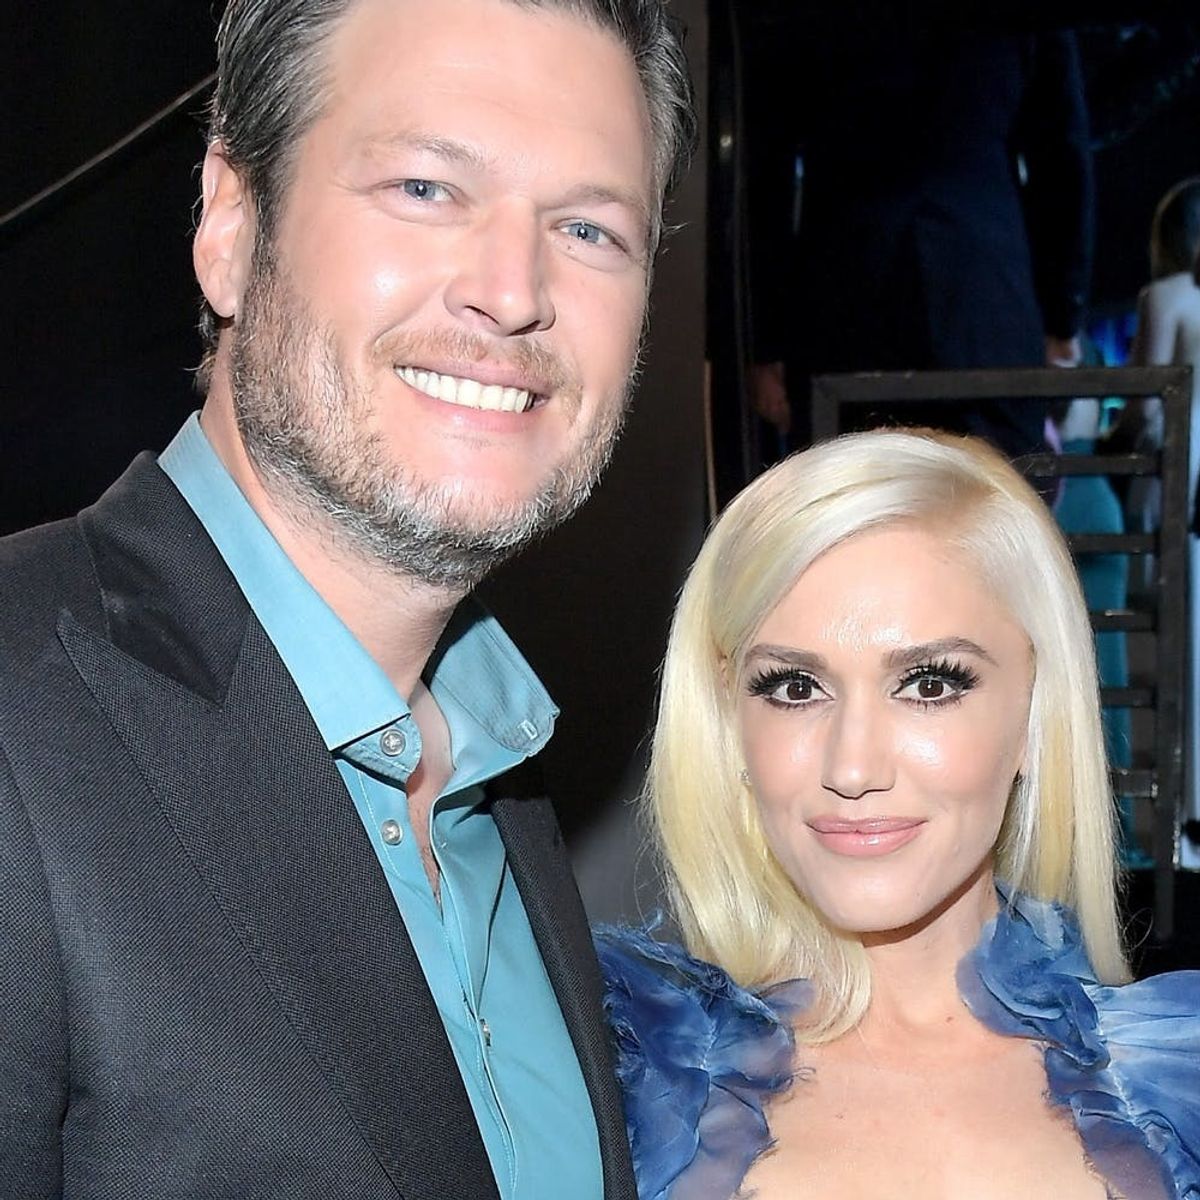 Gwen Stefani and Blake Shelton’s Side-by-Side Yearbook Photos Are “Perfection”